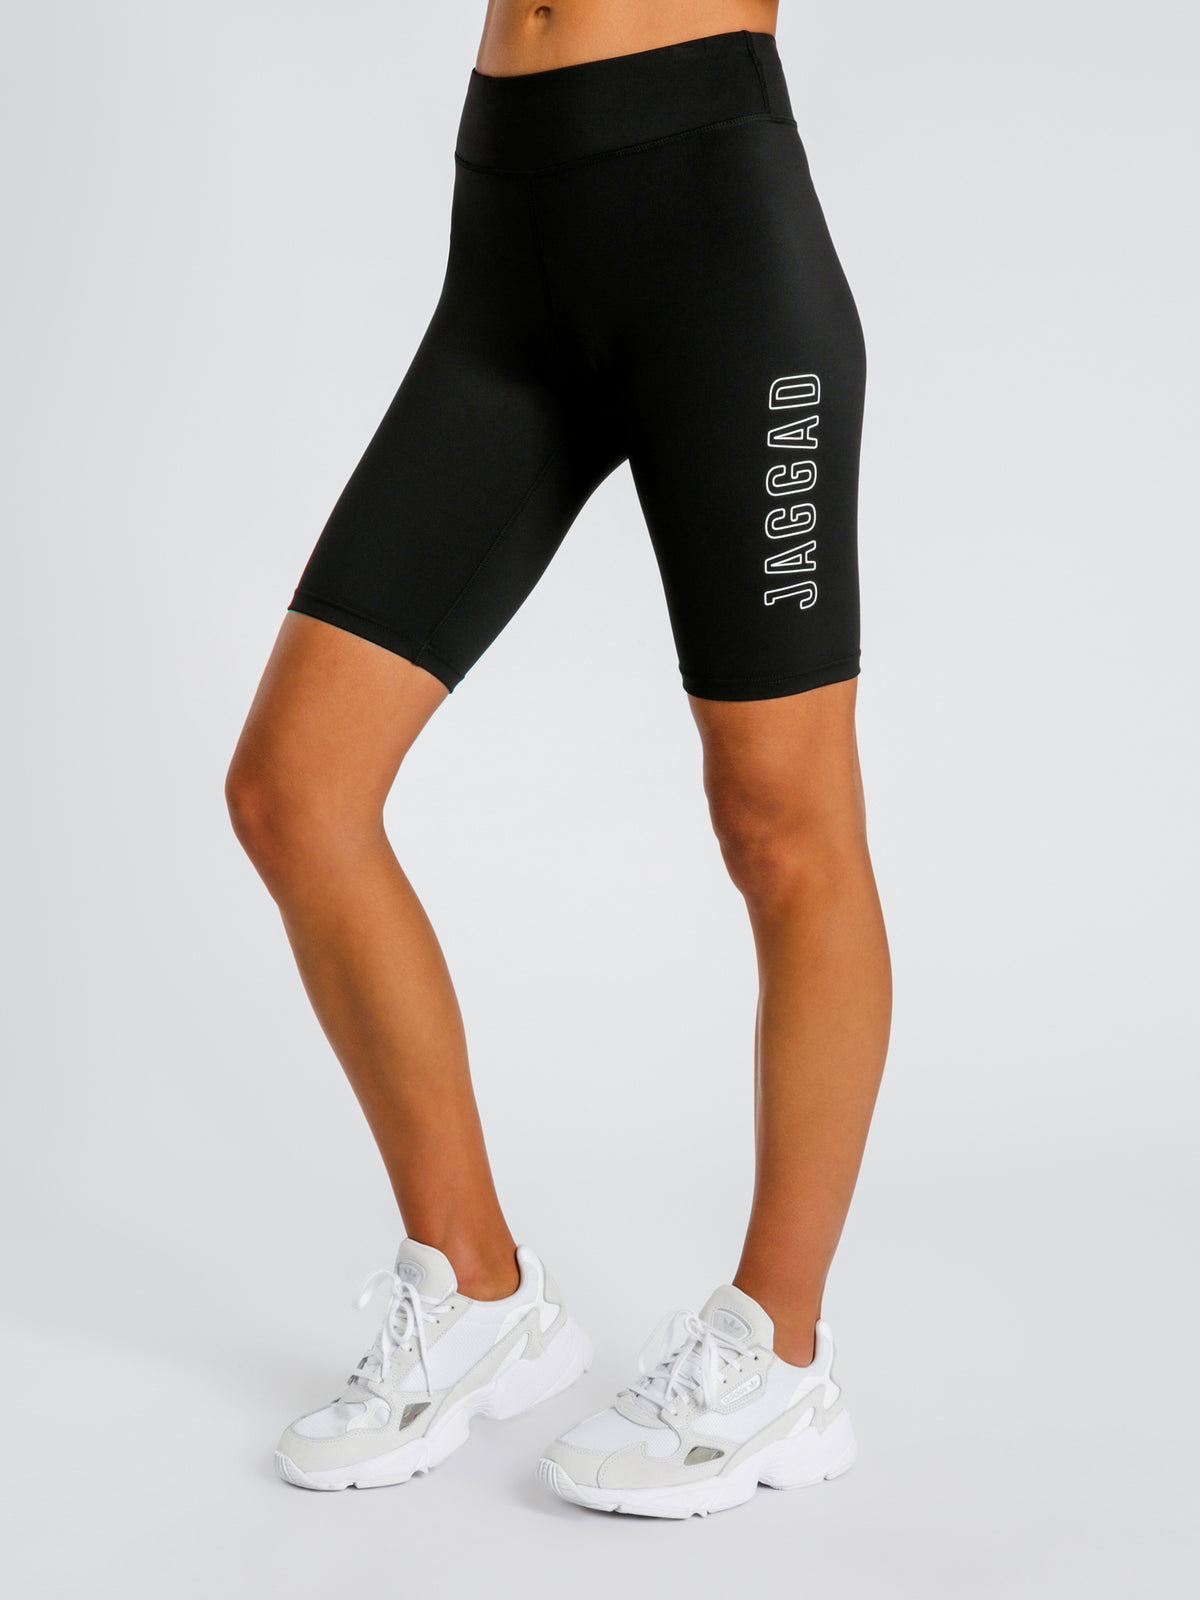 Classic Spin Shorts in Black